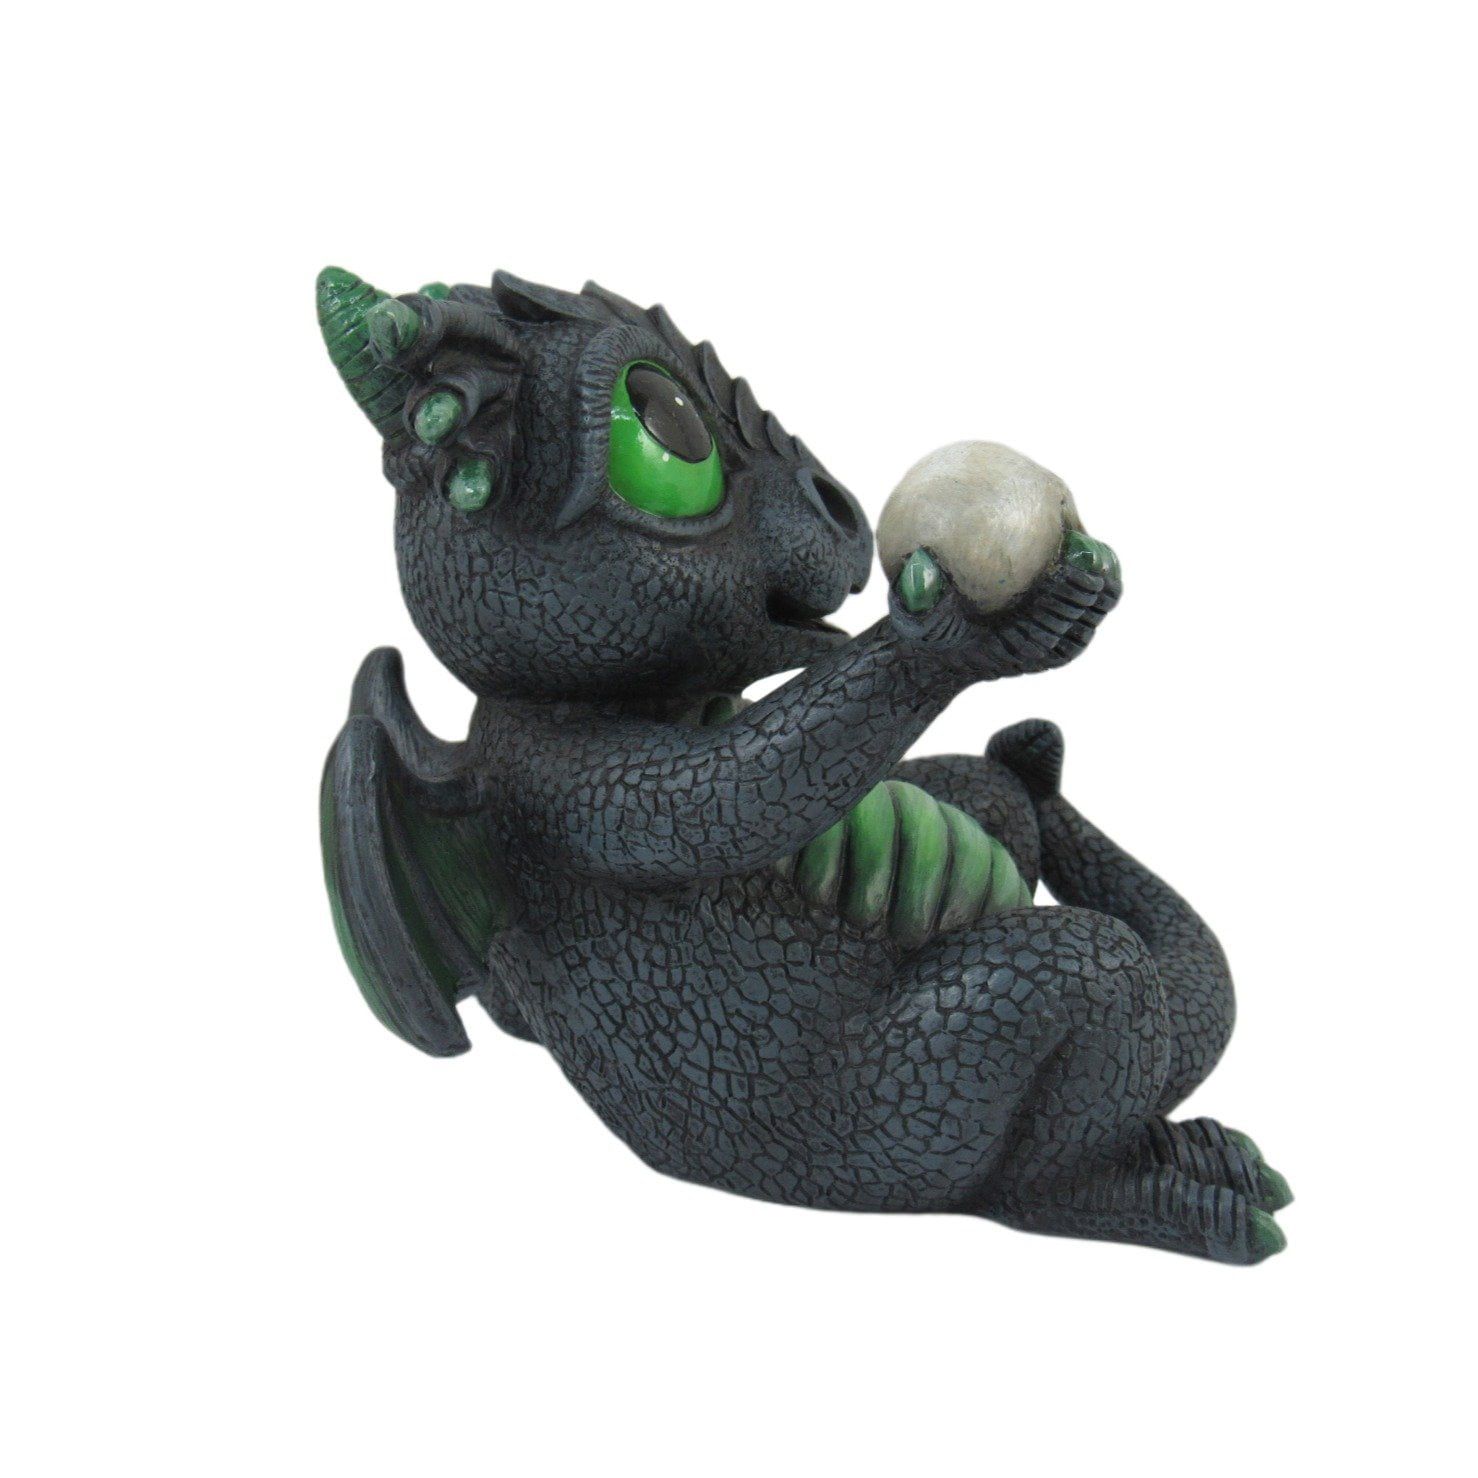 6inch Dragon Statue Obsidian World of Wonders Grave Yard Series Dreamland Dragons Collectible Dragon Figurine with Birth Certificate Fantasy Home Decor Accent